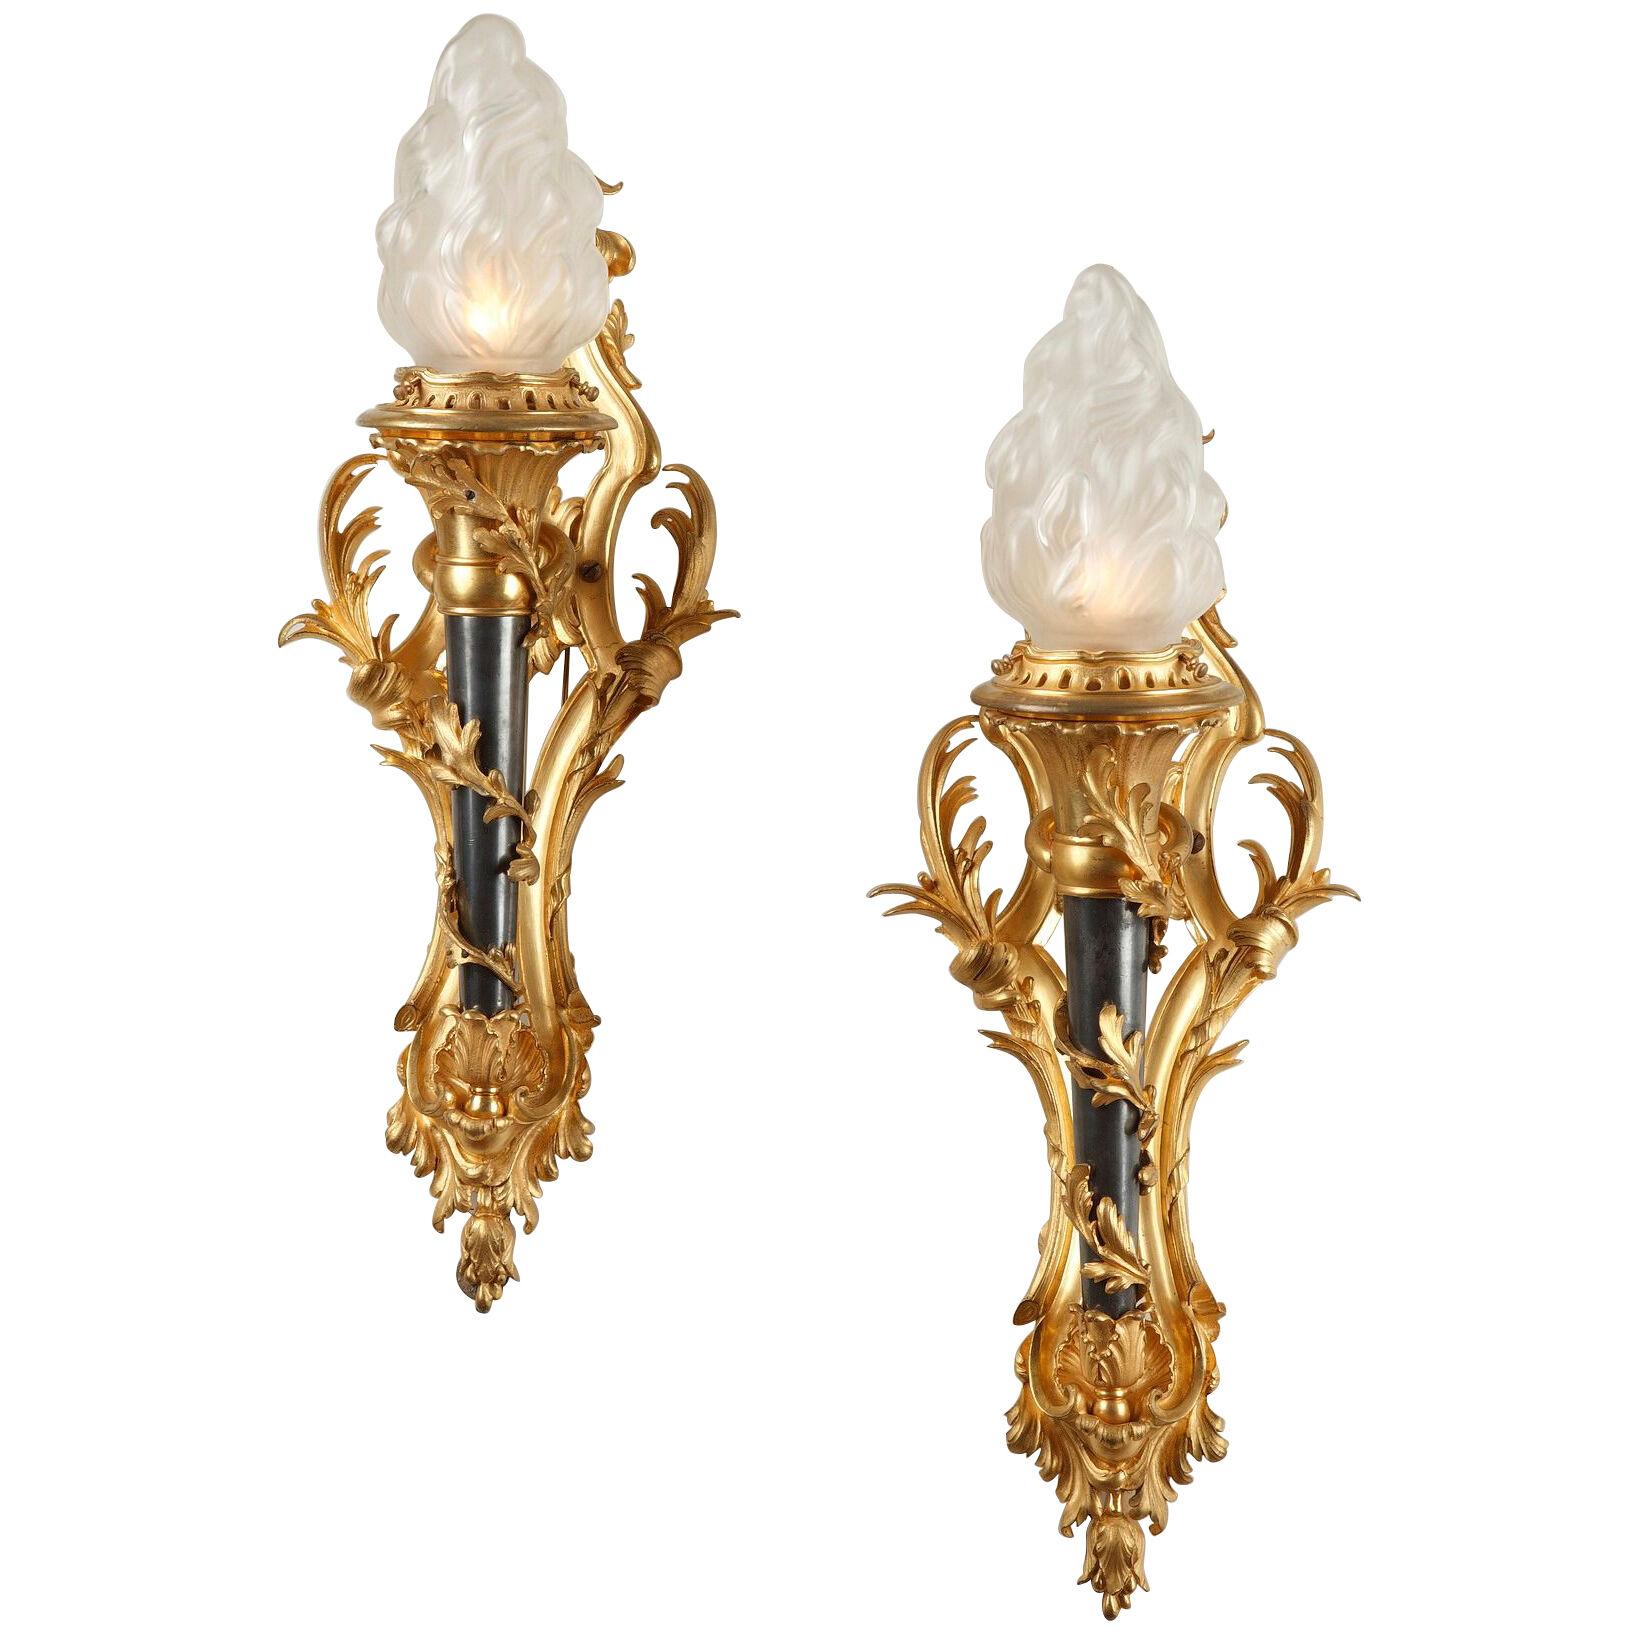 Pair of Louis XVI Style Torch Wall-Lights by Gagneau, France, Circa 1880